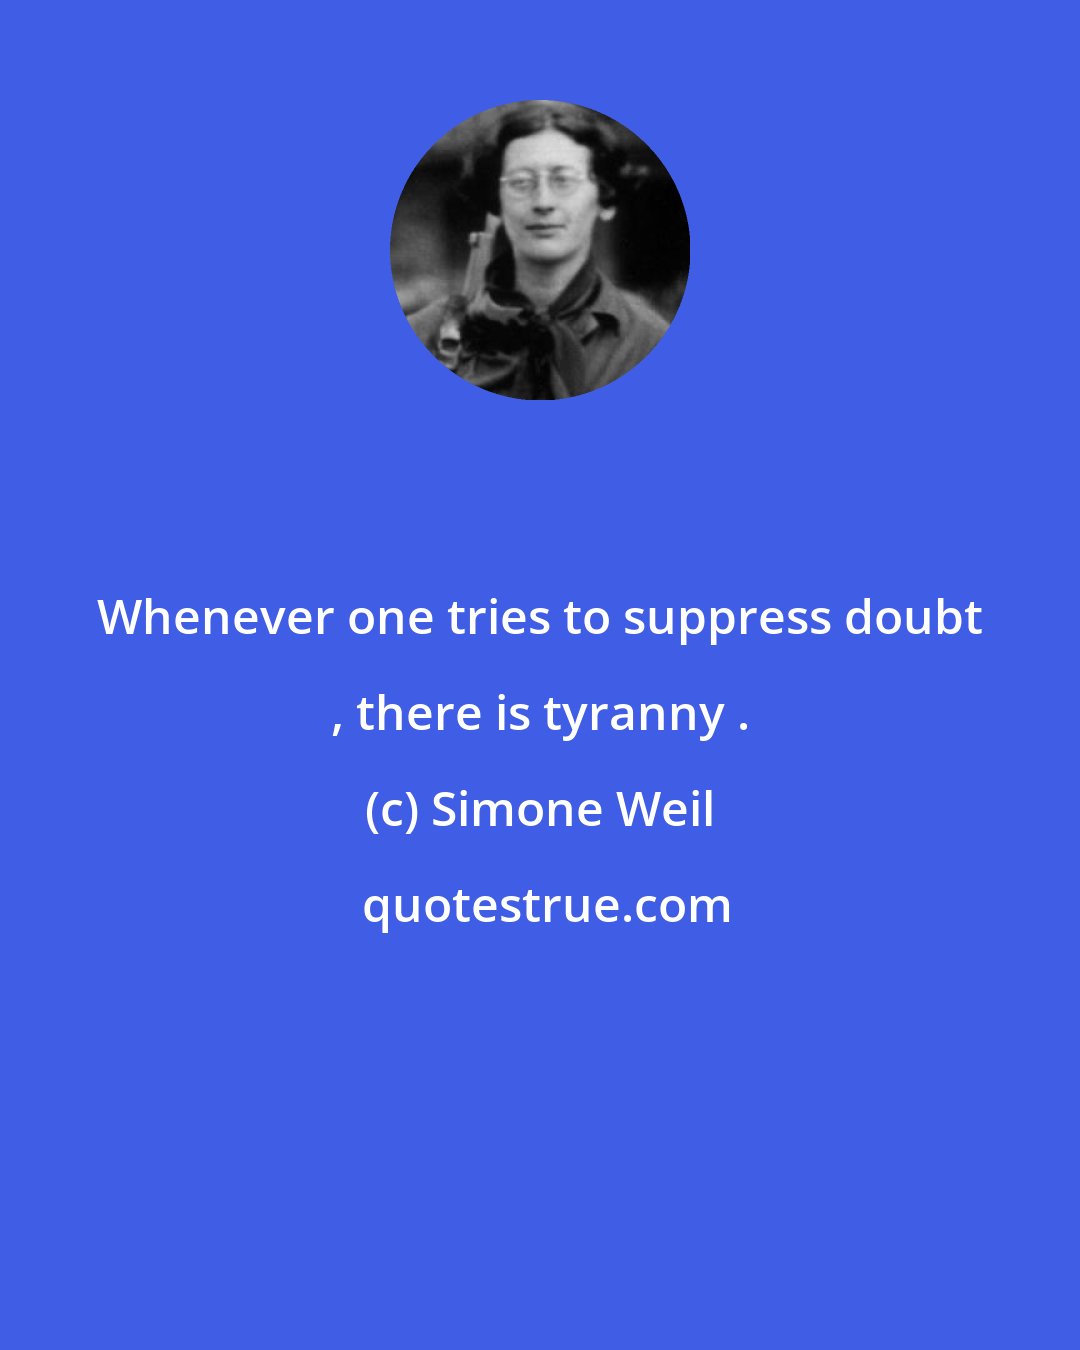 Simone Weil: Whenever one tries to suppress doubt , there is tyranny .